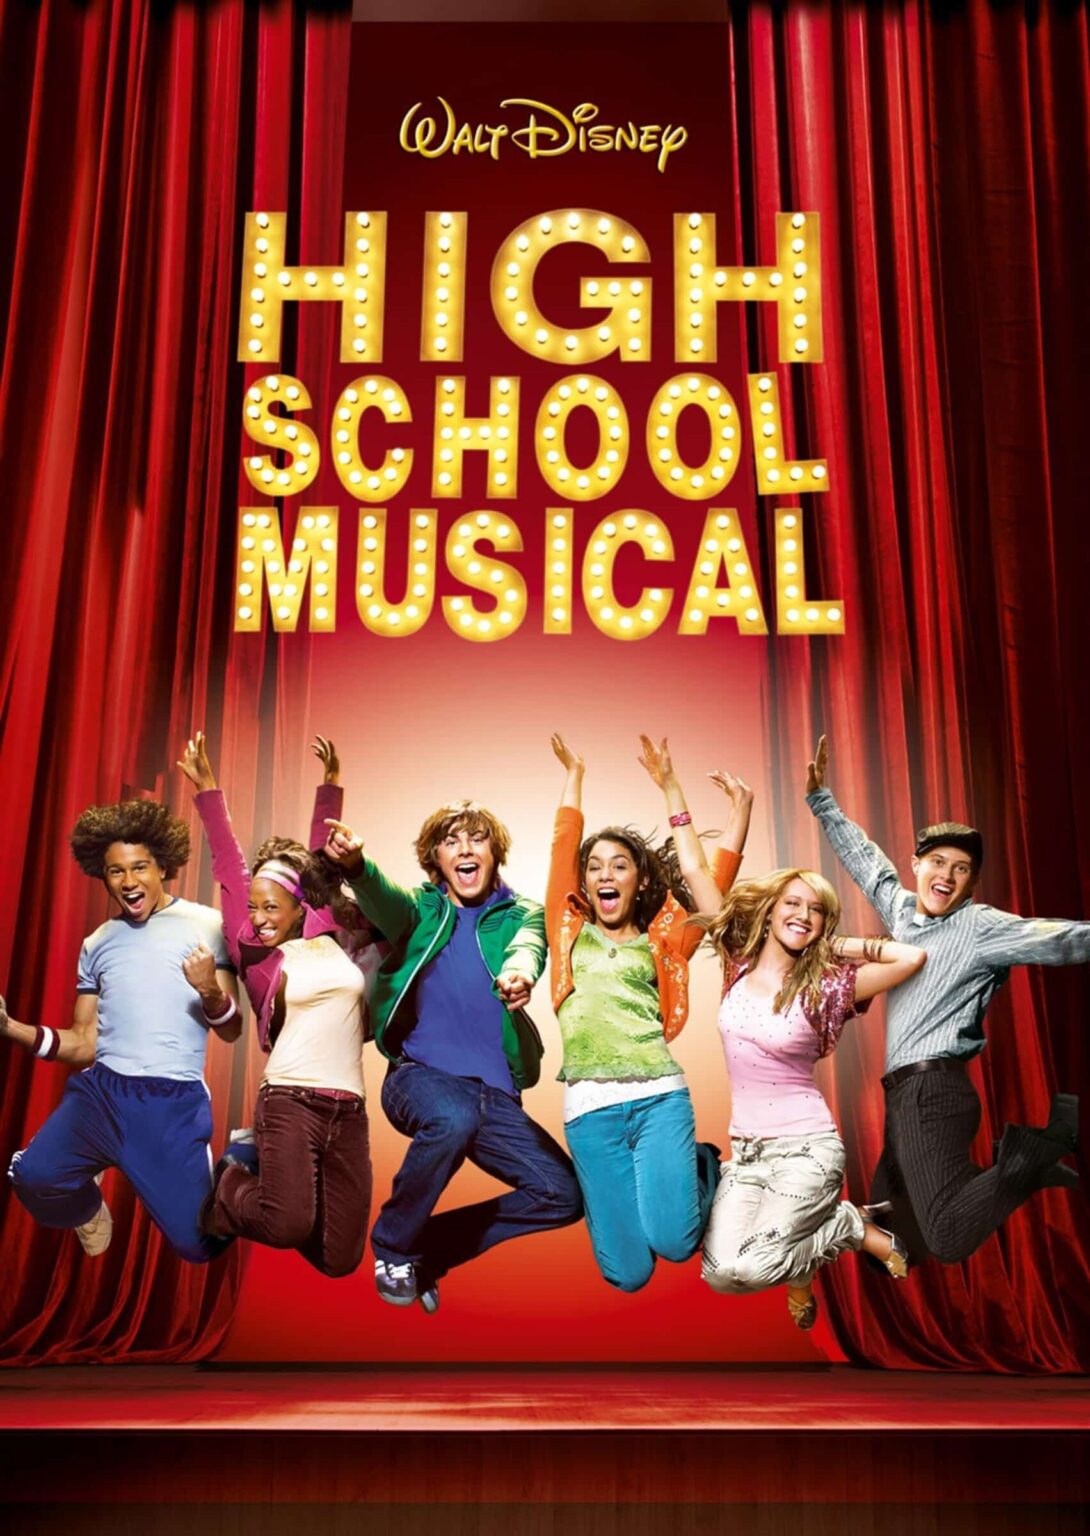 'High School Musical' remains a classic franchise. Where is the cast today? Read on to find out what they've been up to.